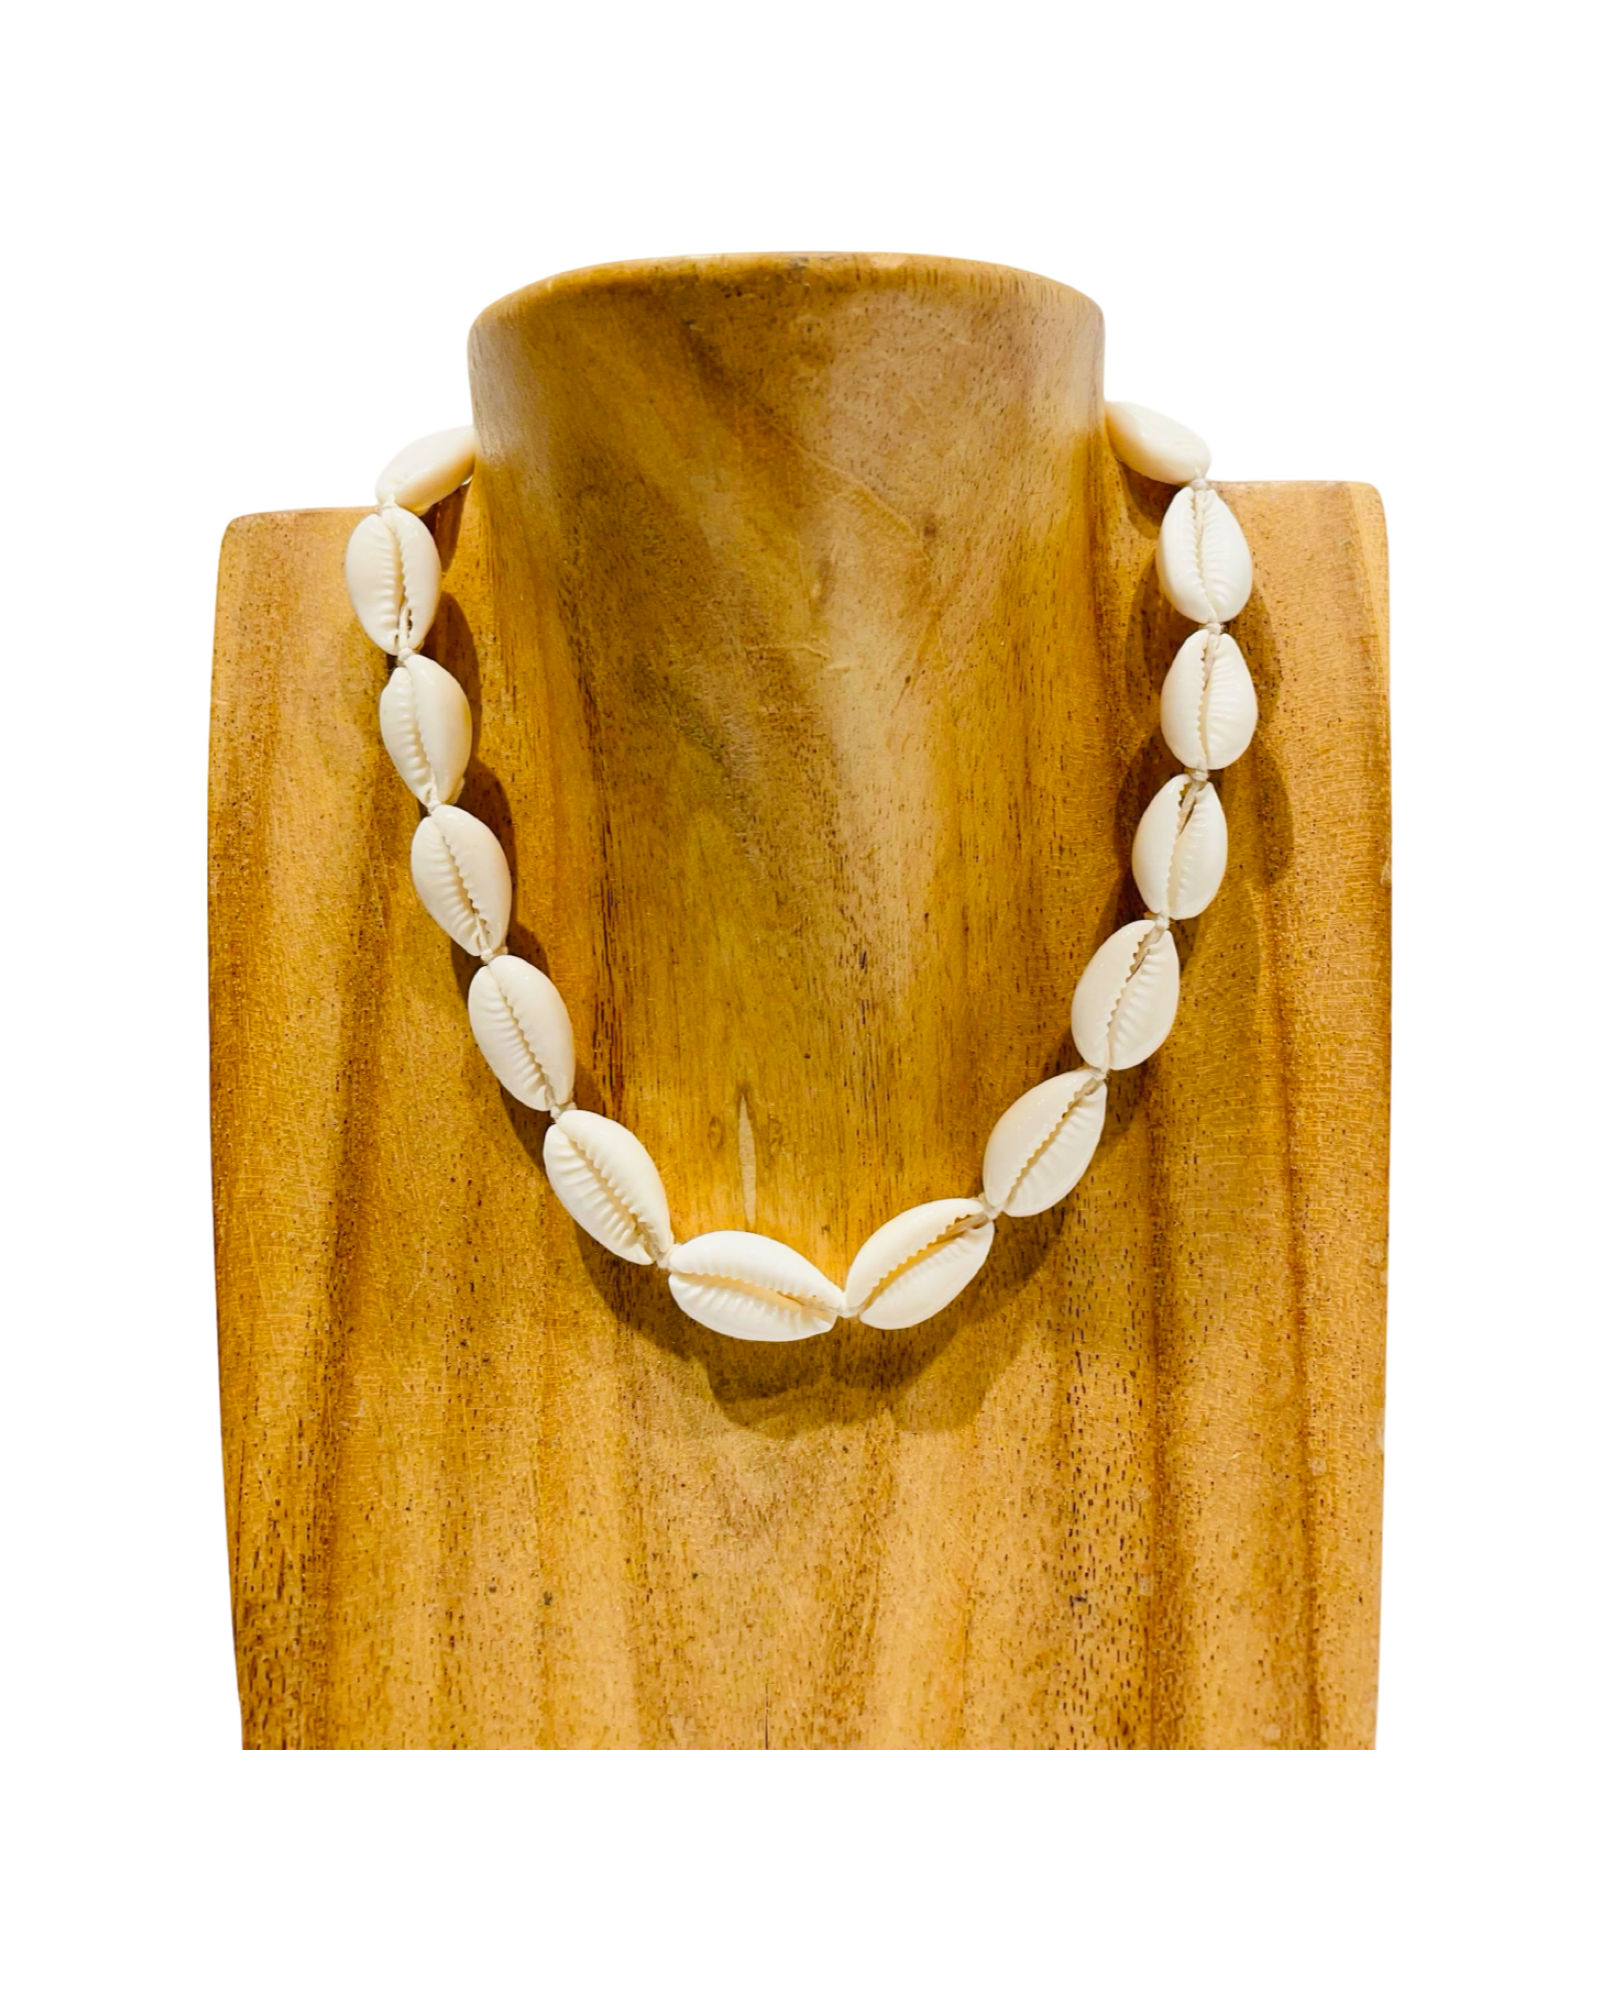 Adjustable cowrie necklace with white shells and white string.